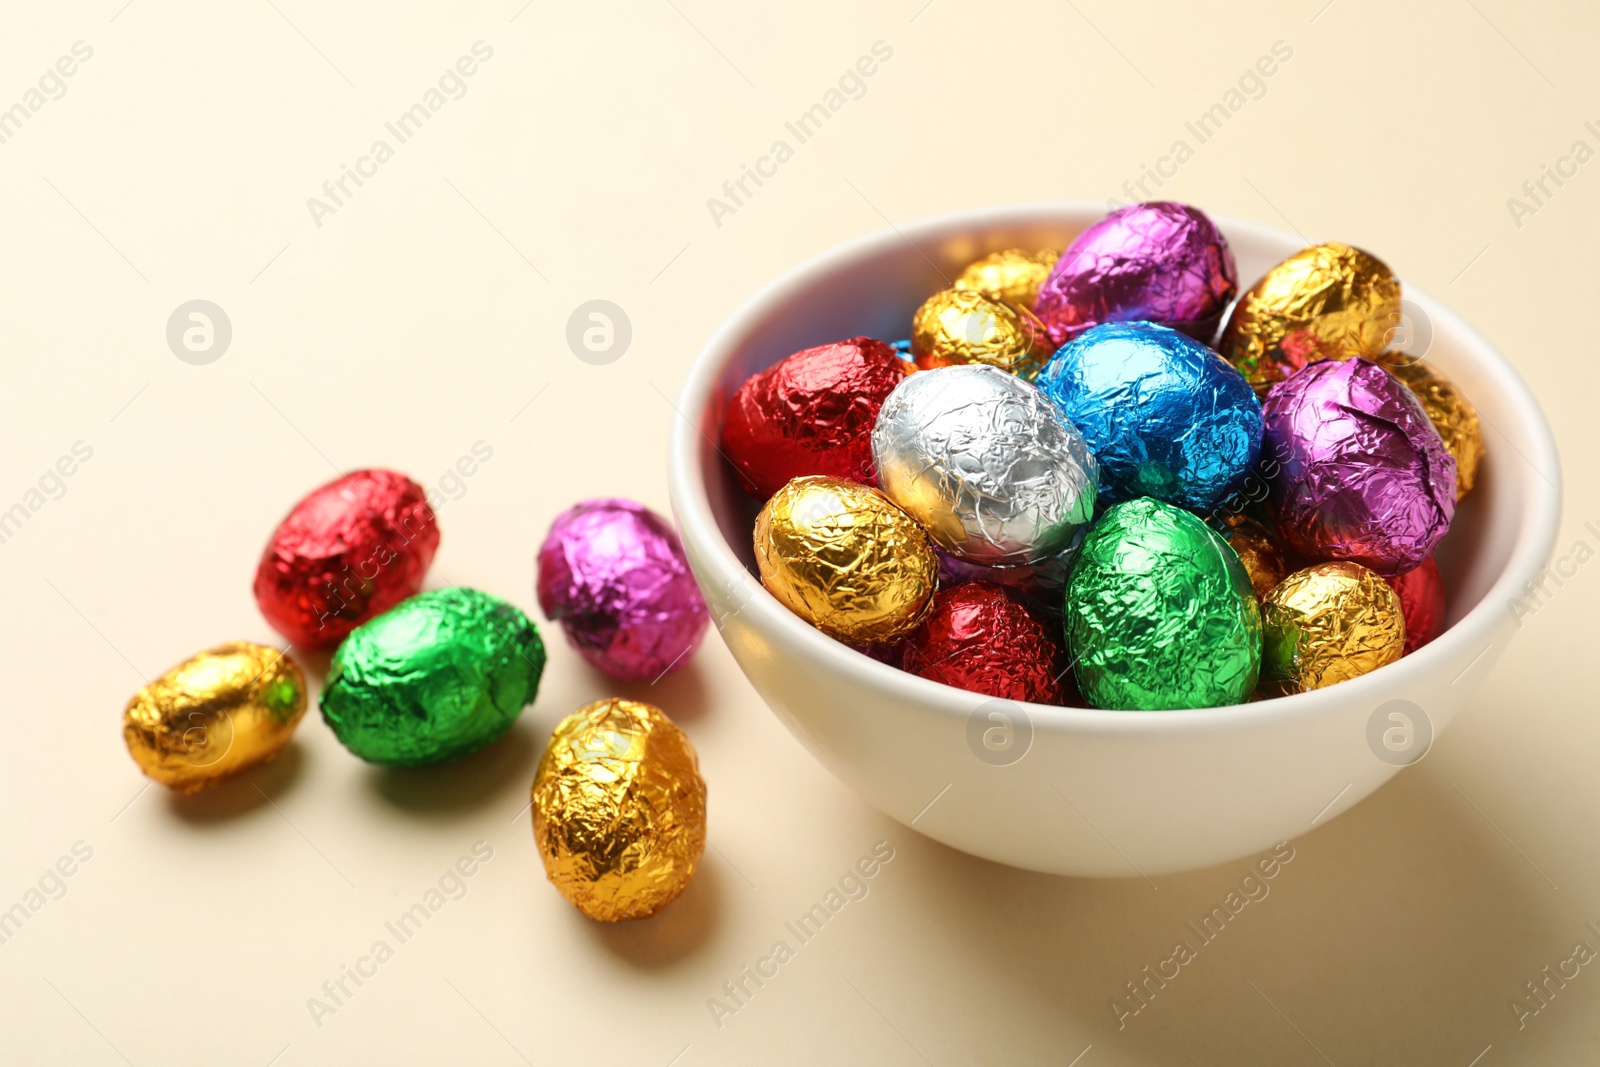 Photo of Chocolate eggs wrapped in colorful foil on beige background